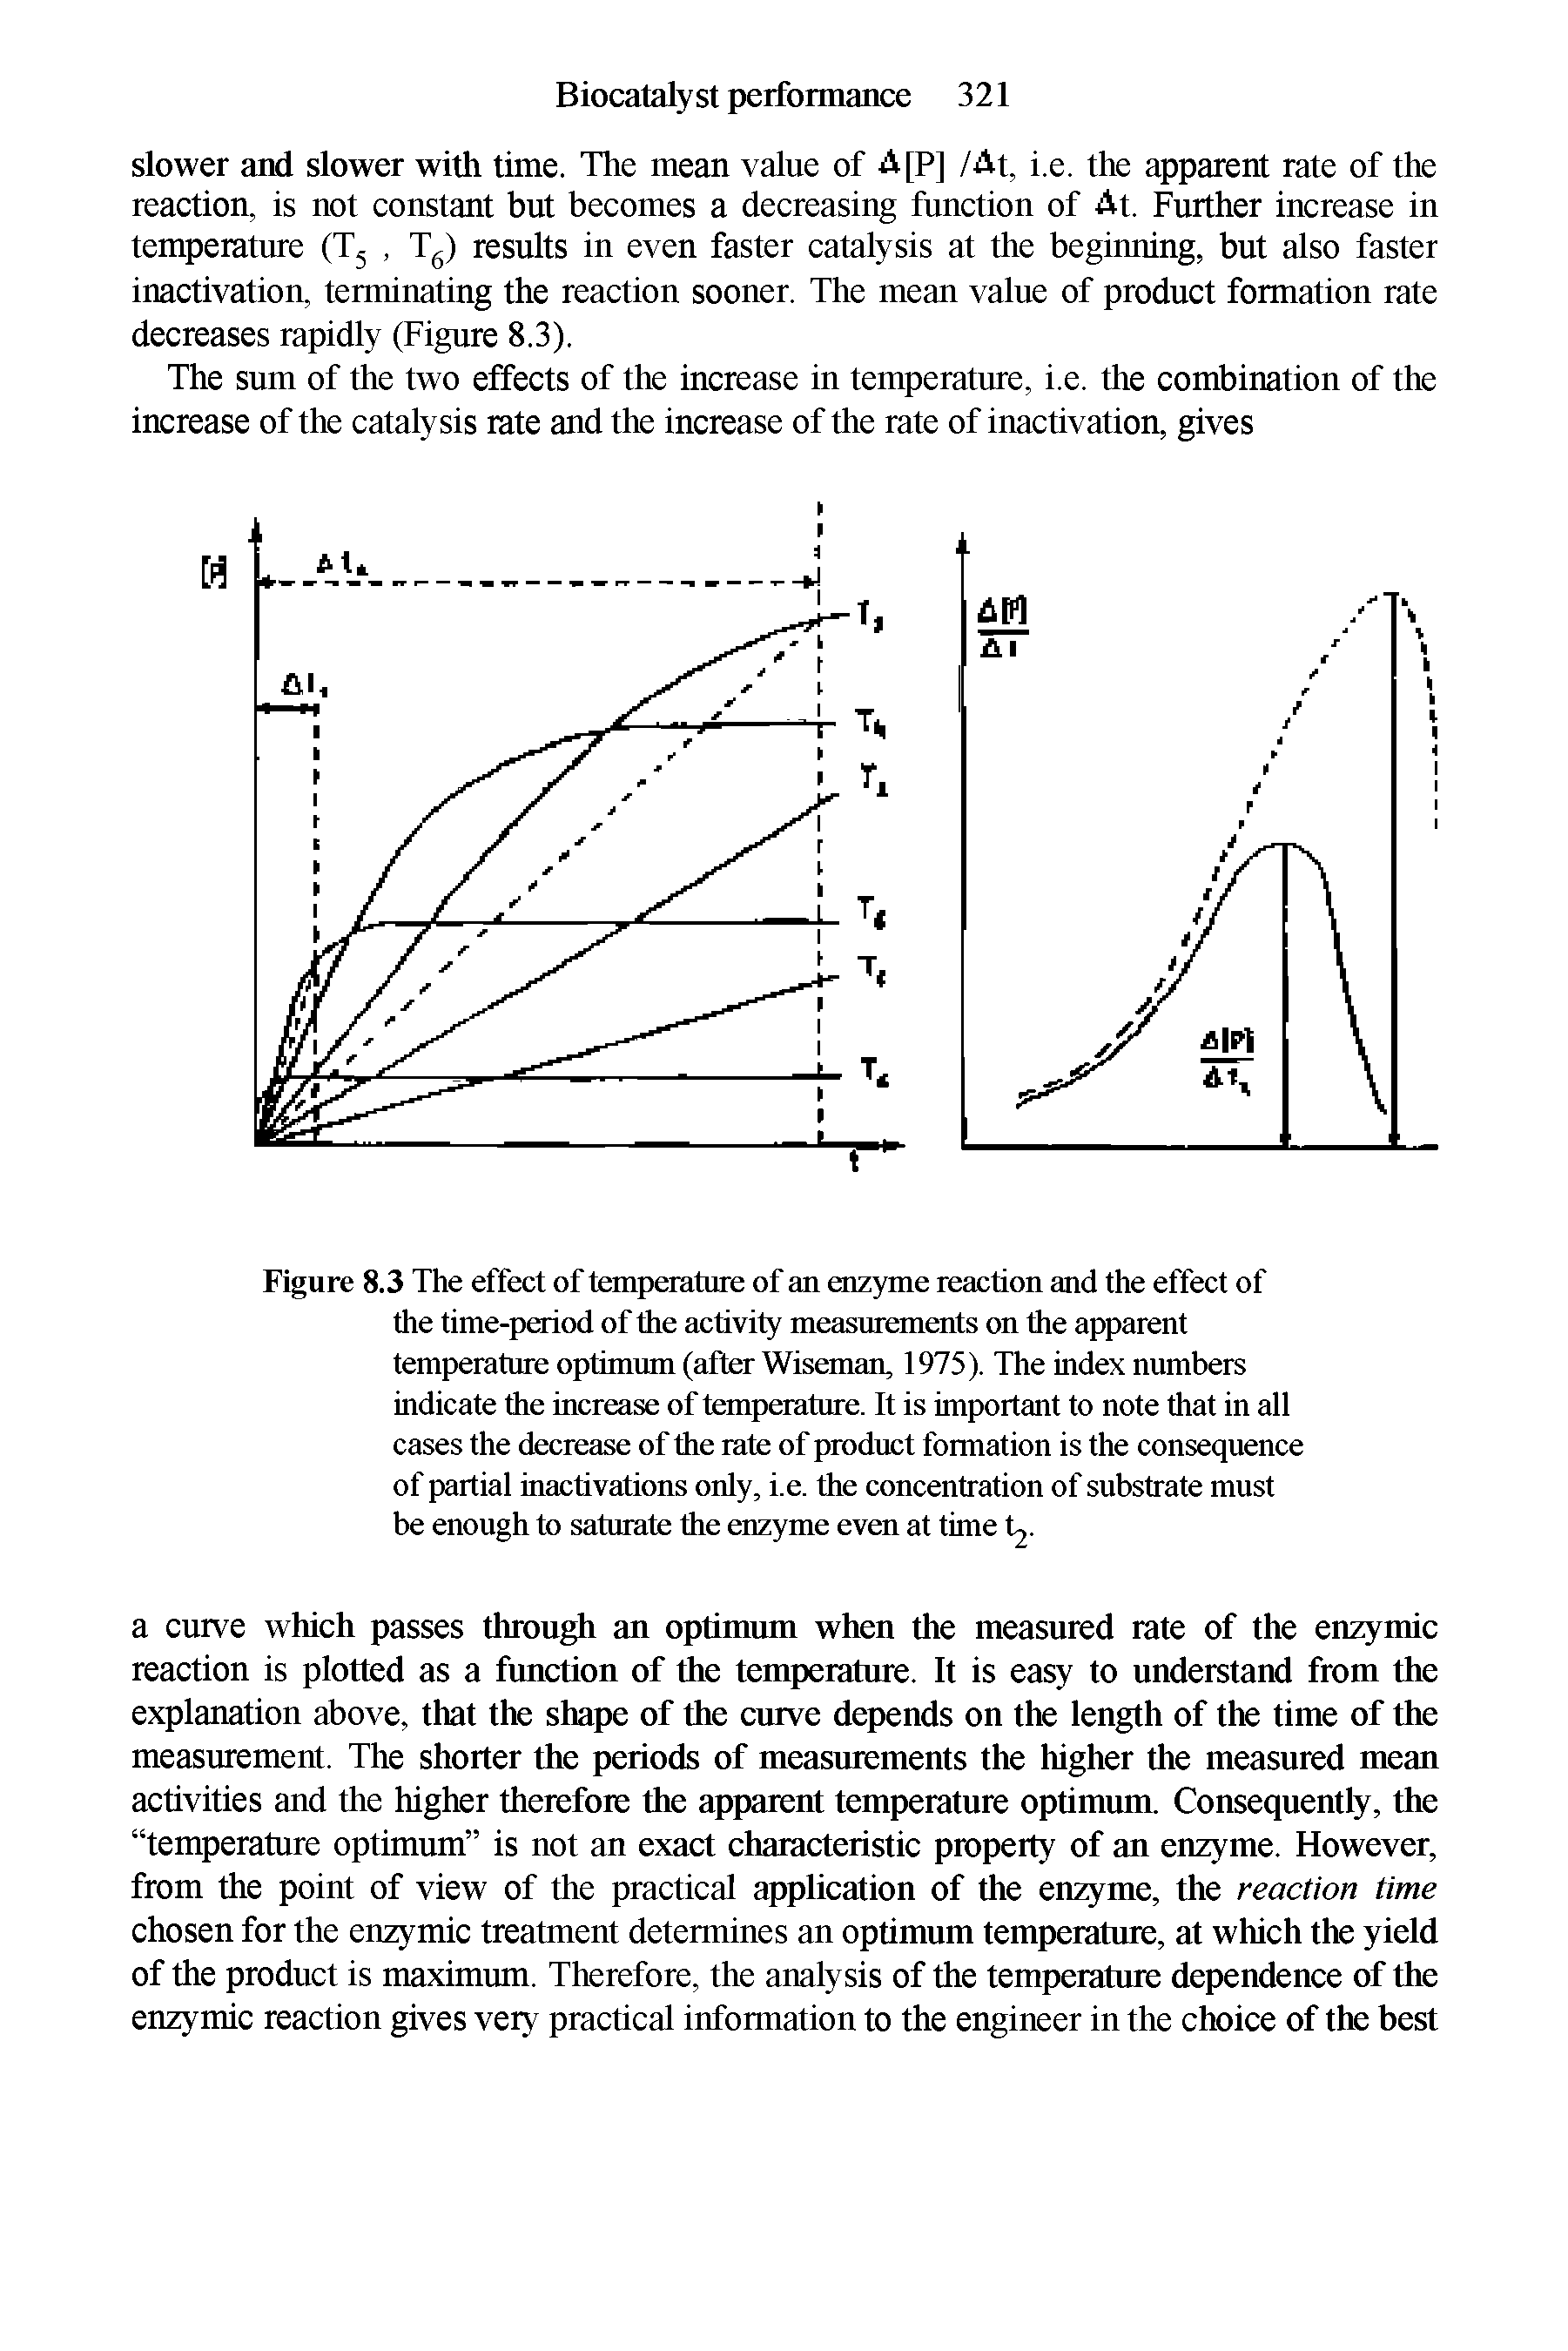 Figure 8.3 The effect of temperature of an enzyme reaction and the effect of the time-period of the activity measurements on the apparent temperature optimum (after Wiseman, 1975). The index numbers indicate the increase of temperature. It is important to note that in all cases the decrease of the rate of product formation is the consequence of partial inactivations only, i.e. the concentration of substrate must be enough to saturate the enzyme even at time...